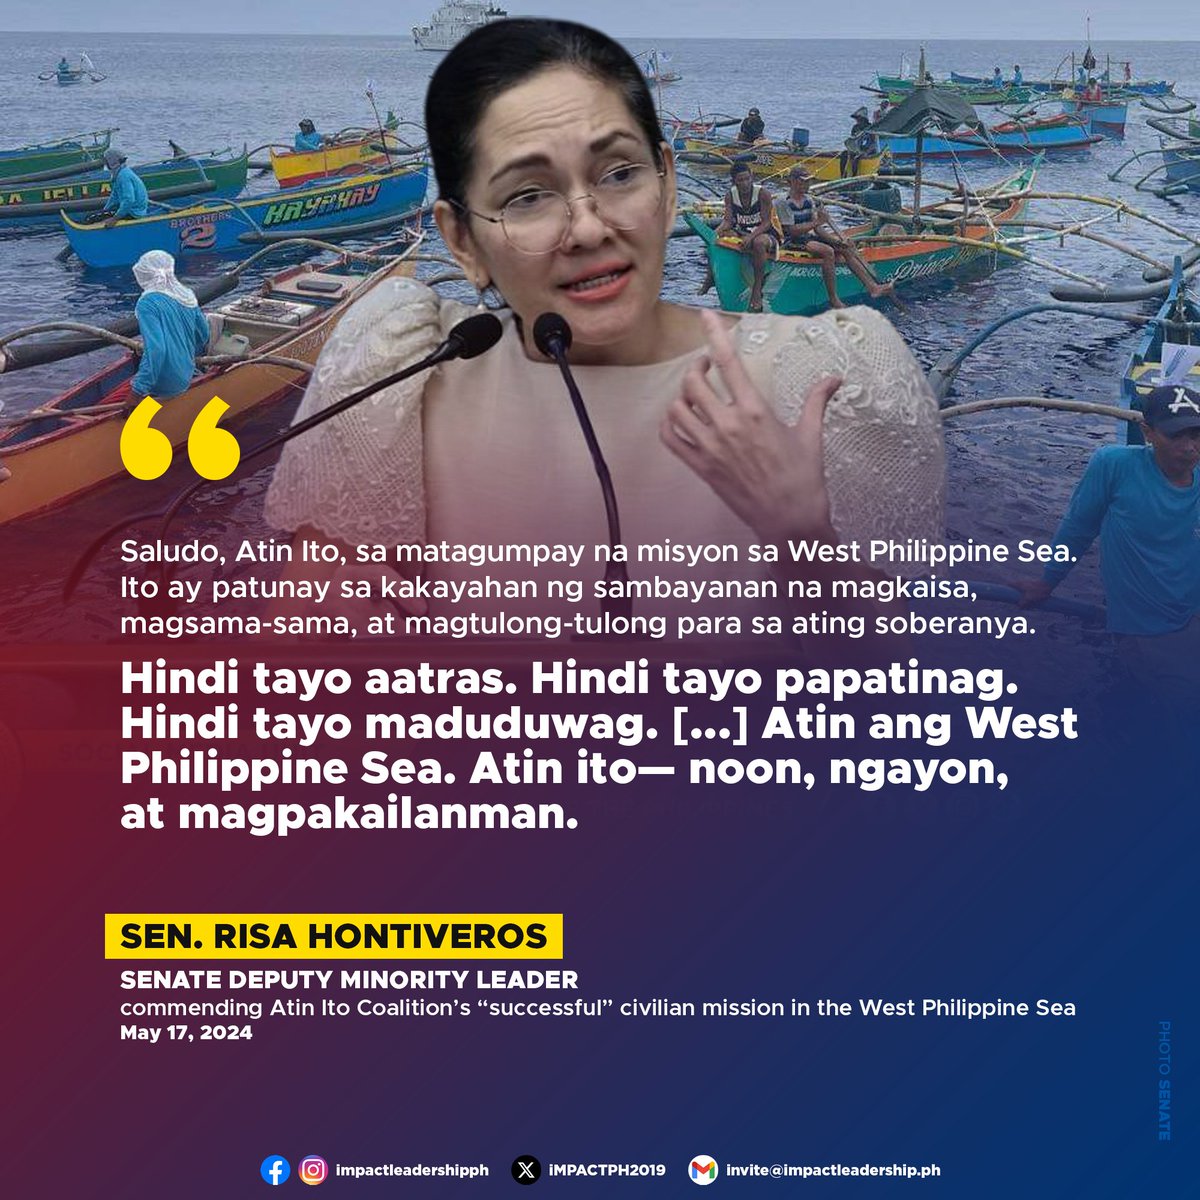 'ATIN ANG WEST PHILIPPINE SEA— NOON, NGAYON, AT MAGPAKAILANMAN'

Sen. Risa Hontiveros lauds the successful civilian mission in the West Philippine Sea (WPS), saying it is a testament to the unity and collective effort of the Filipino people in safeguarding national sovereignty.